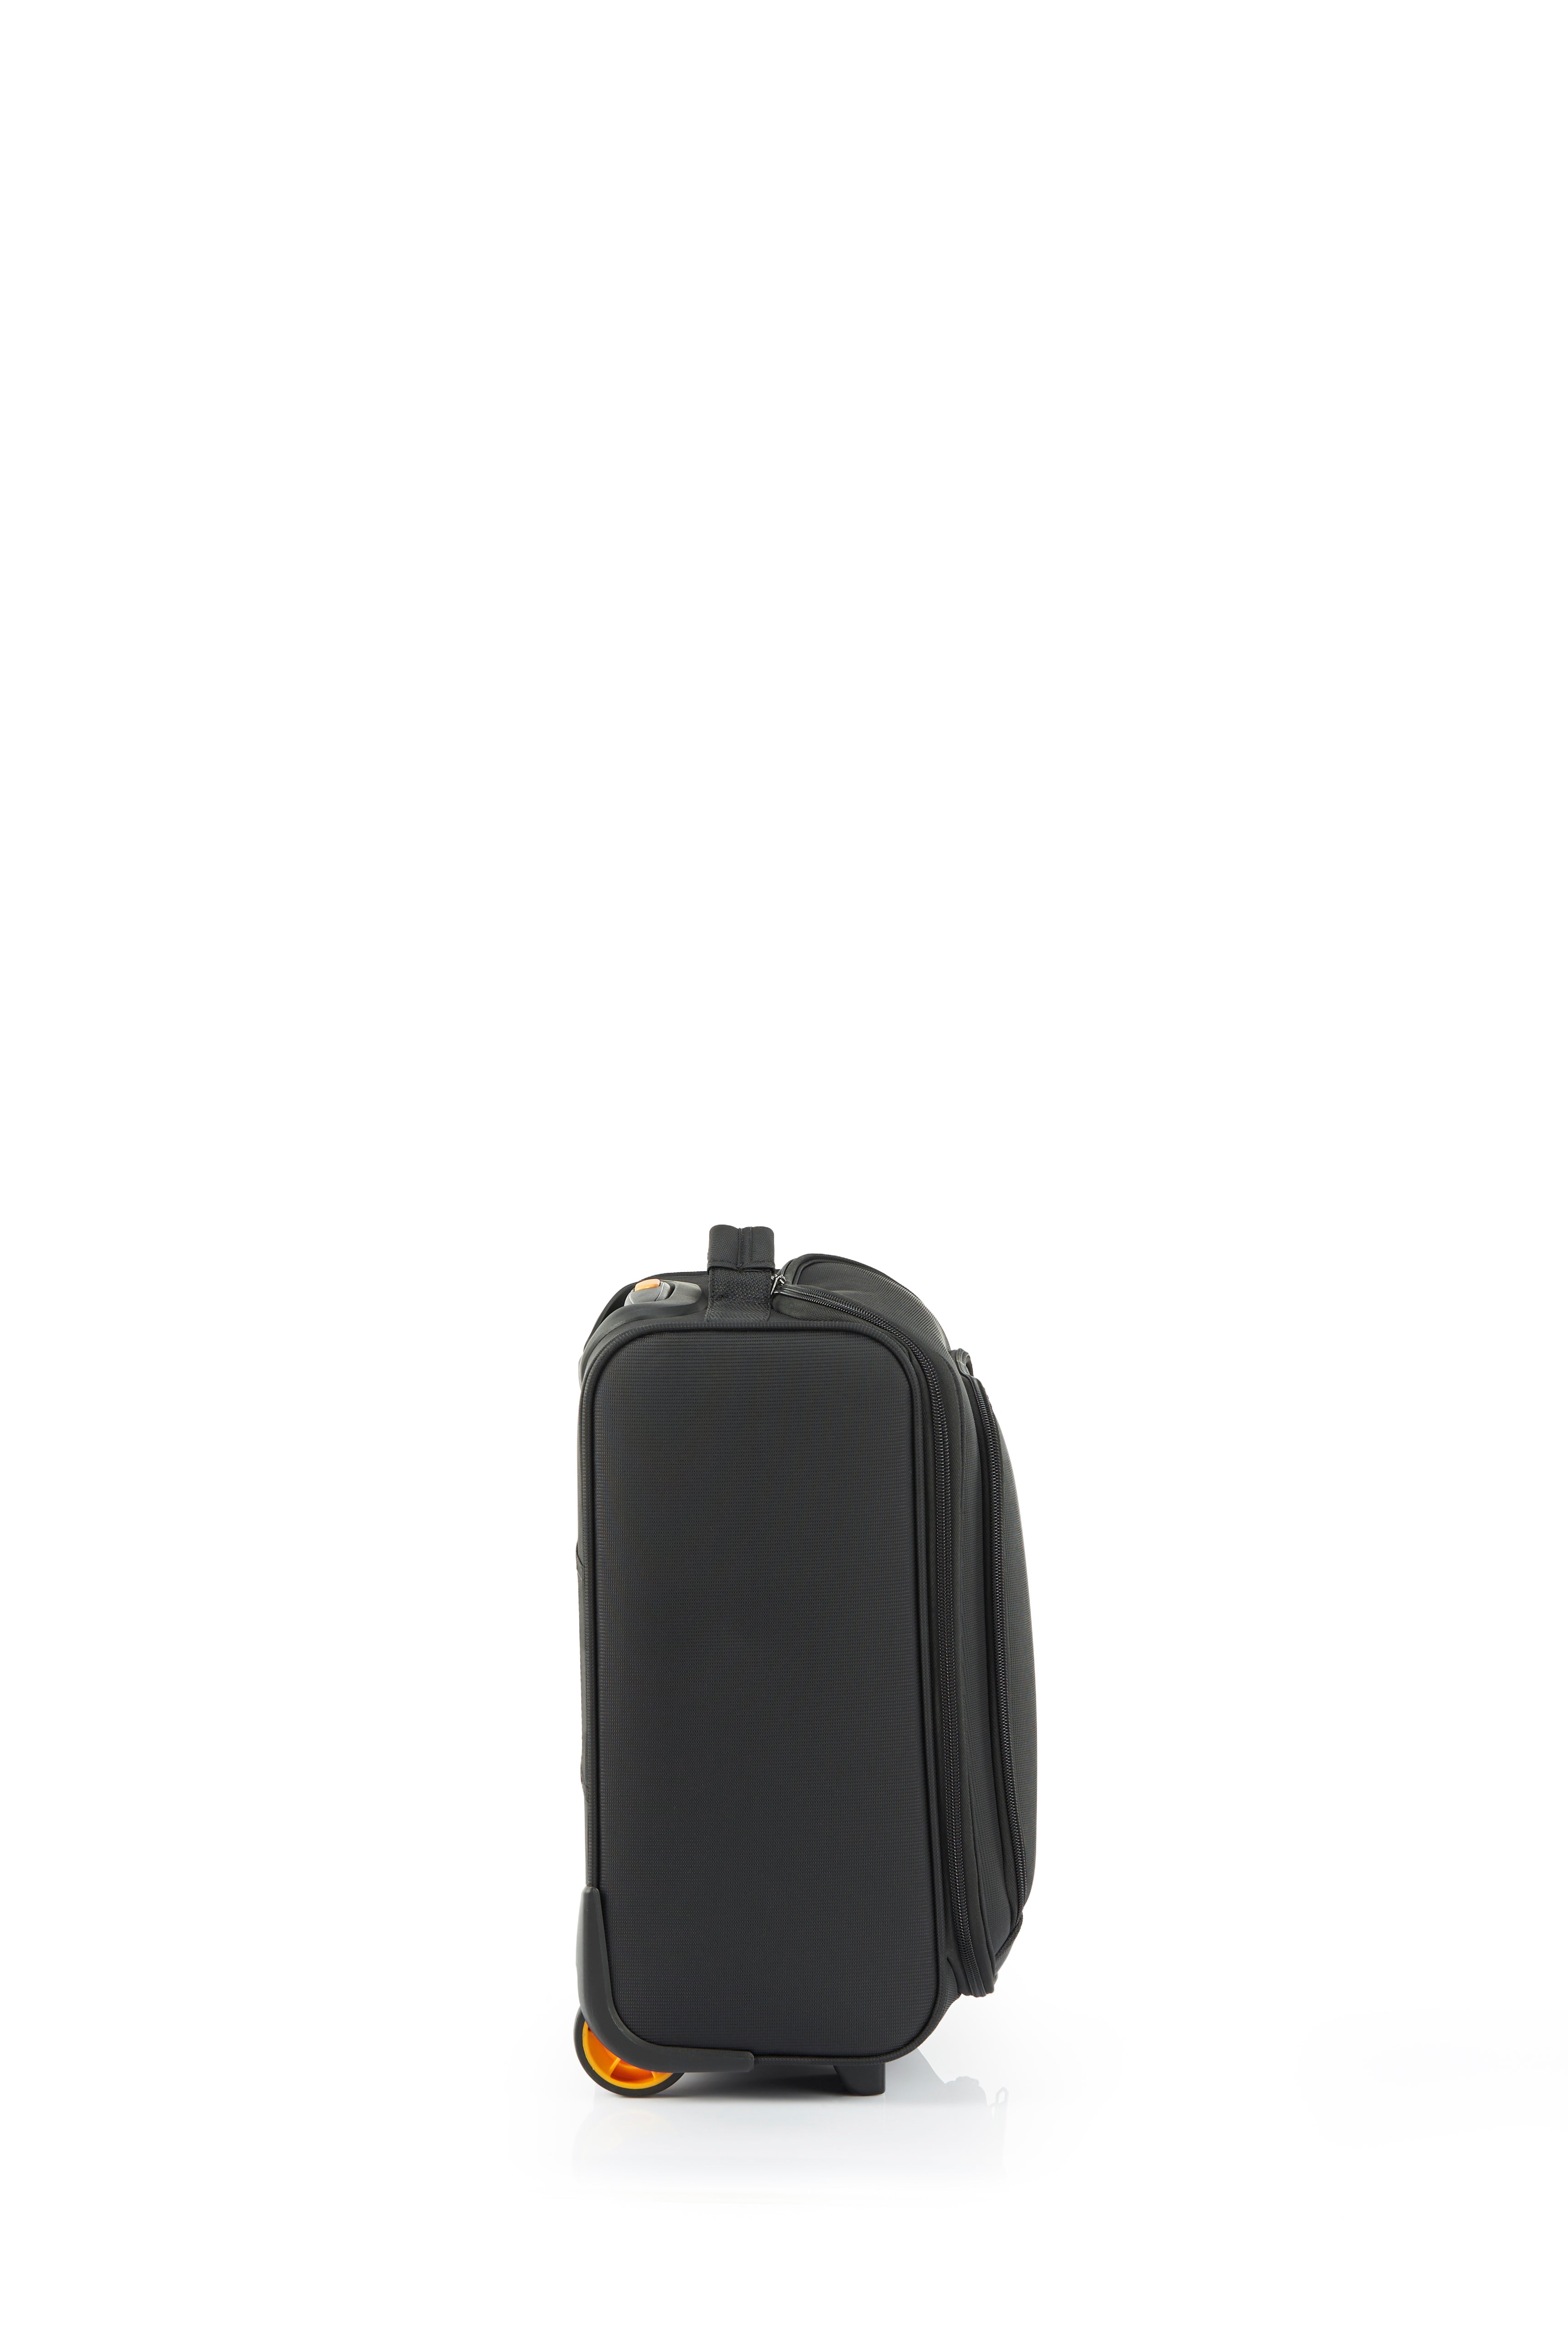 American Tourister - Applite ECO Underseater Suitcase - Black/Must-3